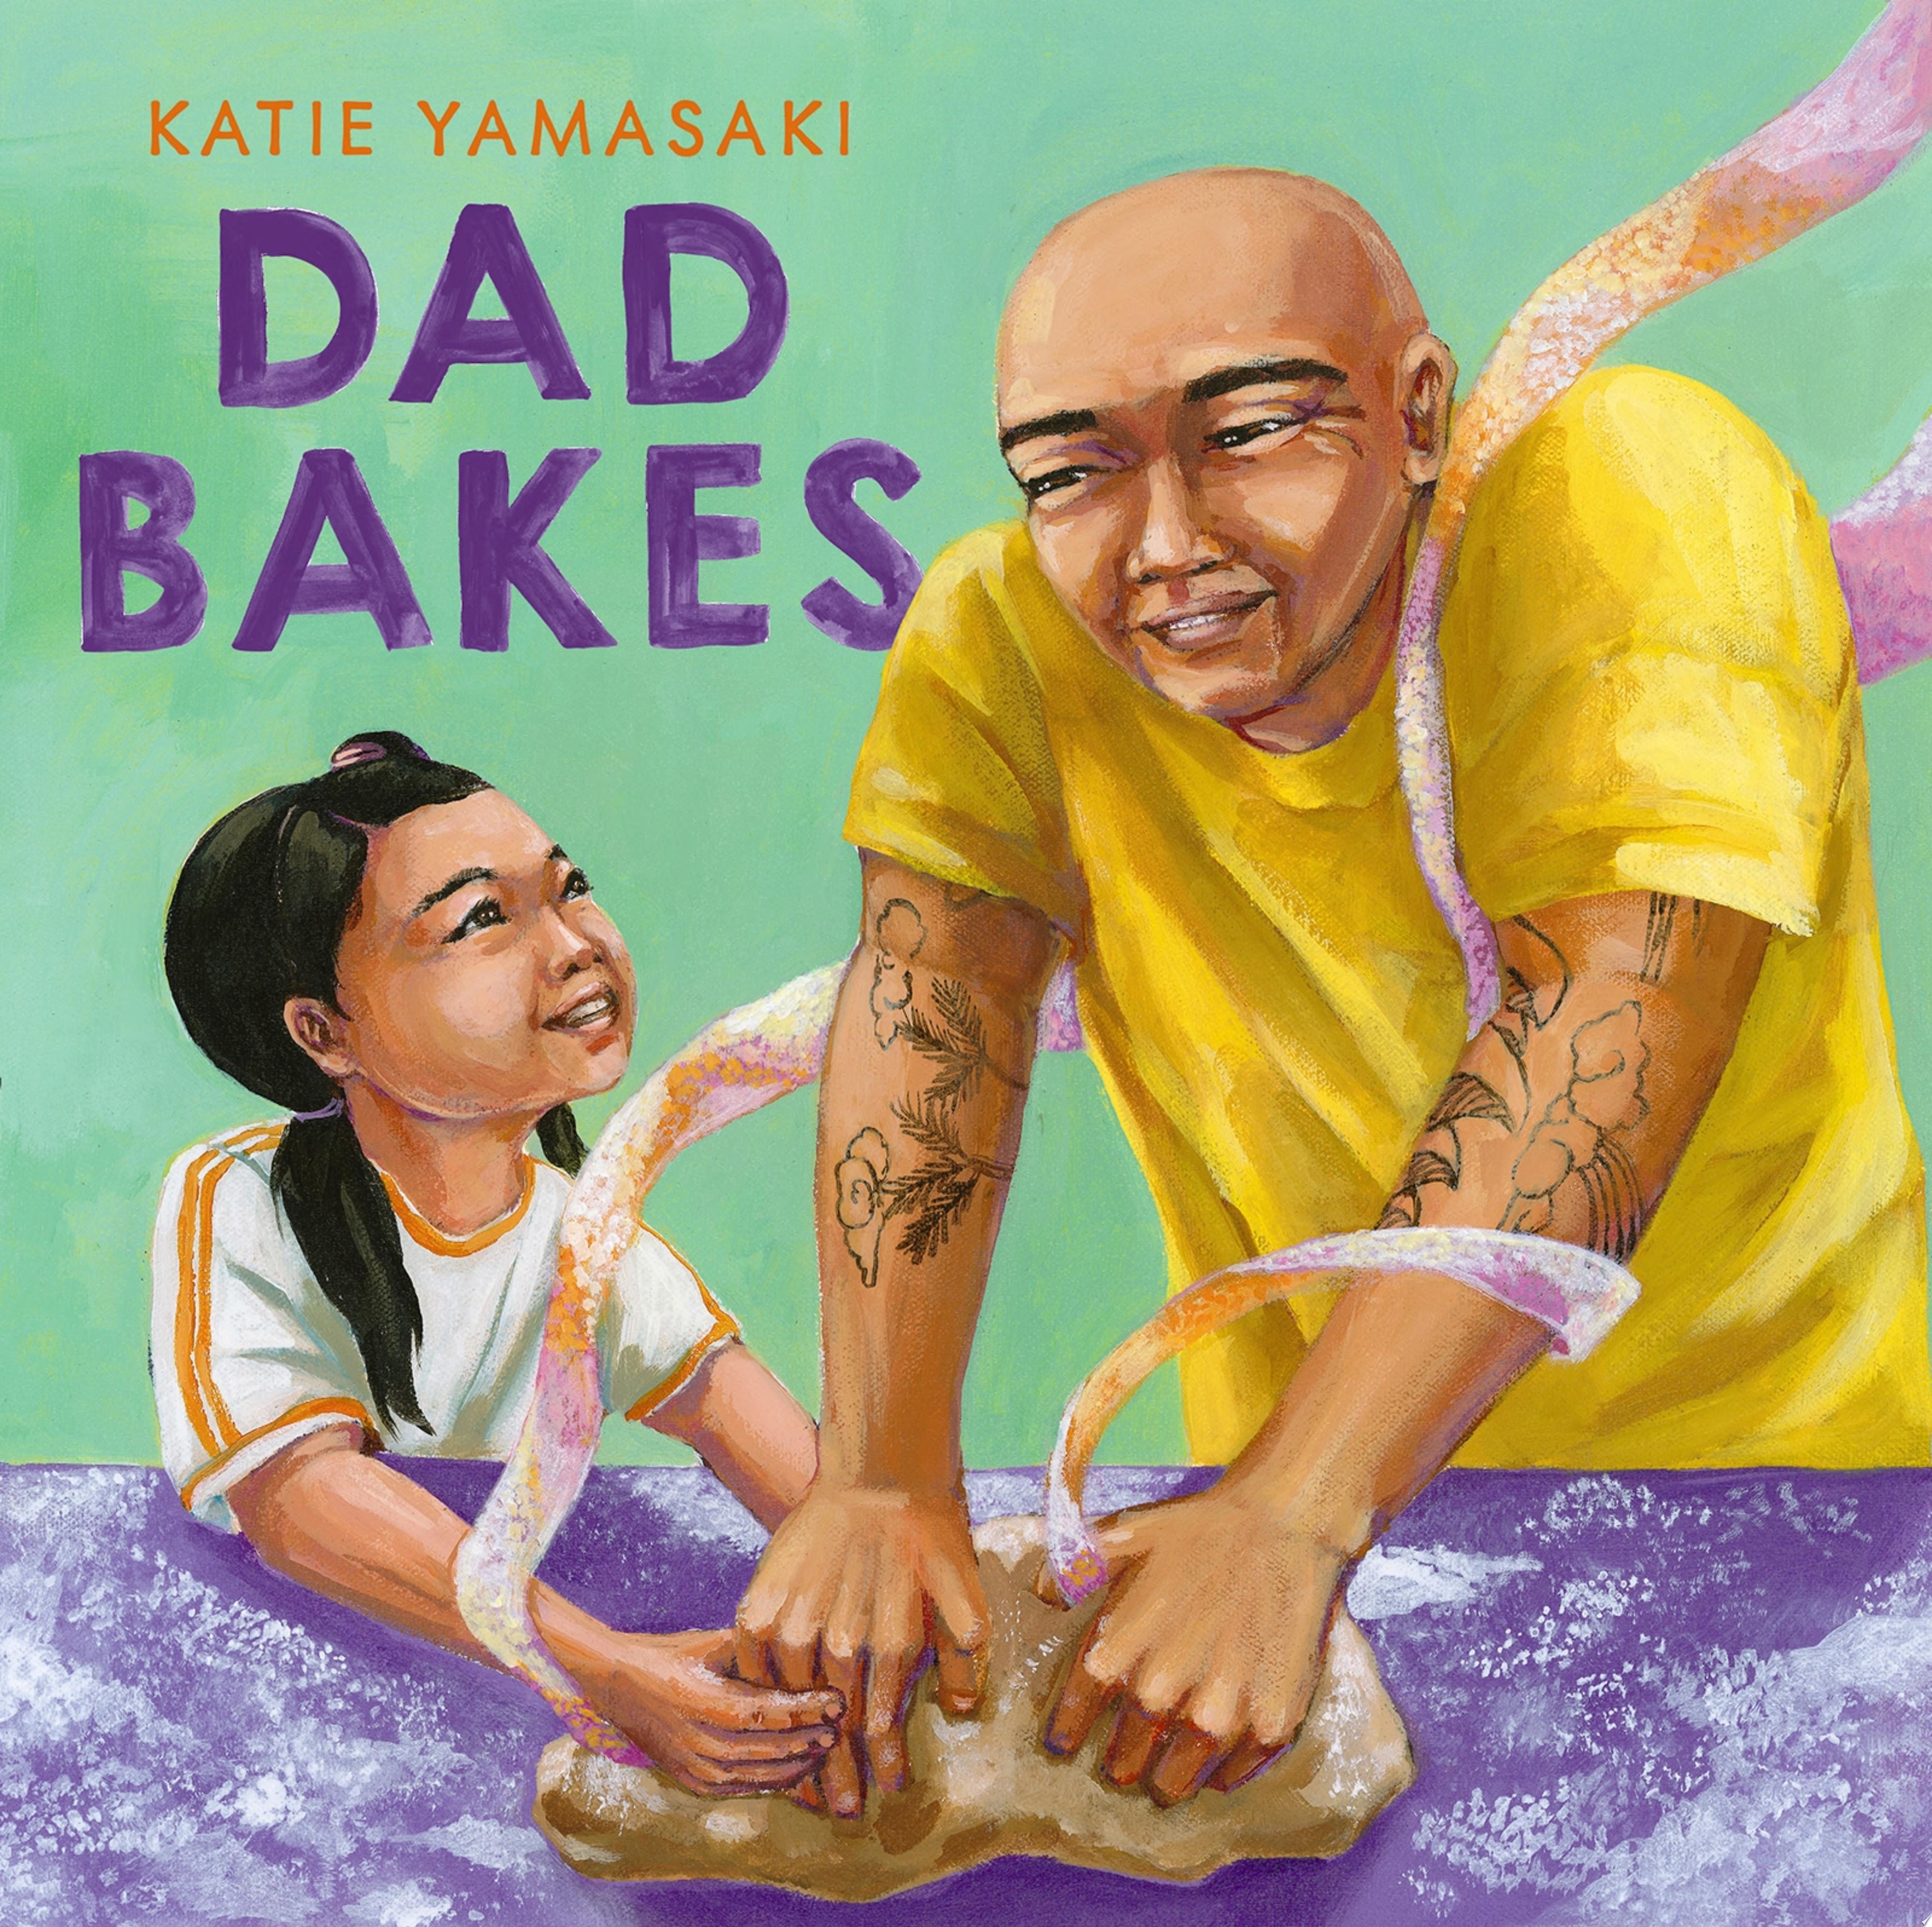 Image for "Dad Bakes"